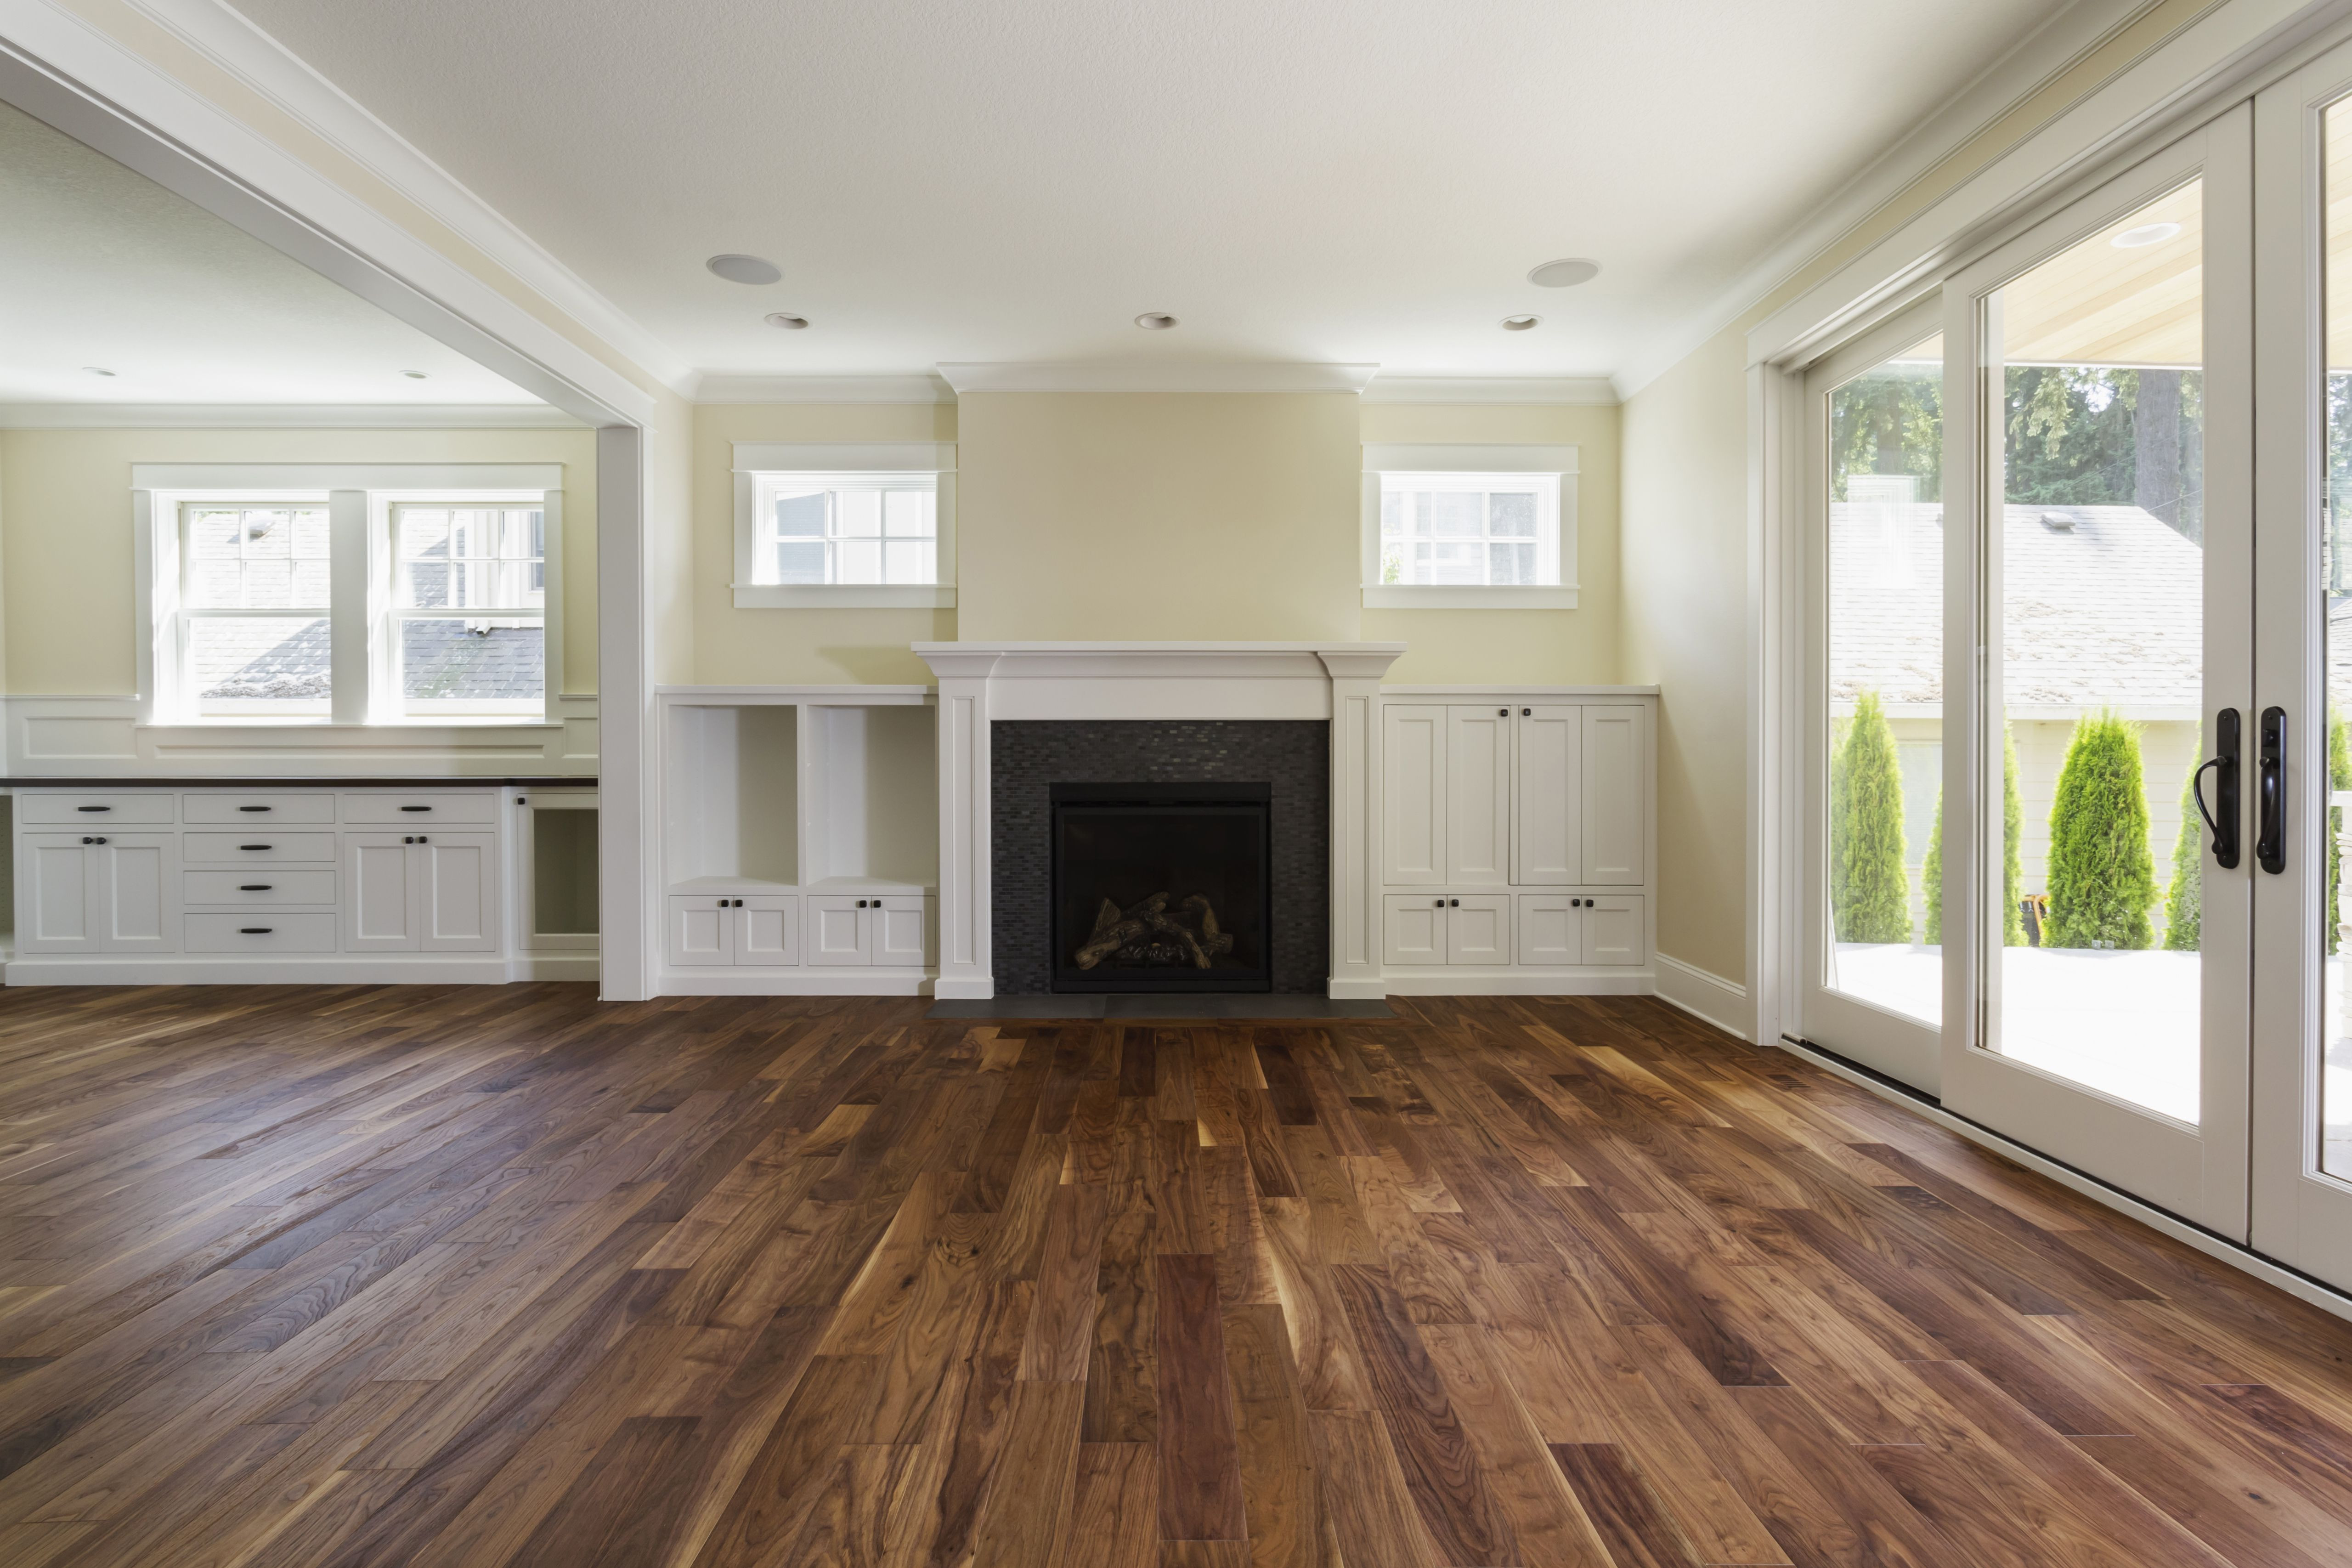 20 Popular Wide Plank Hardwood Flooring Unfinished 2024 free download wide plank hardwood flooring unfinished of the pros and cons of prefinished hardwood flooring in fireplace and built in shelves in living room 482143011 57bef8e33df78cc16e035397